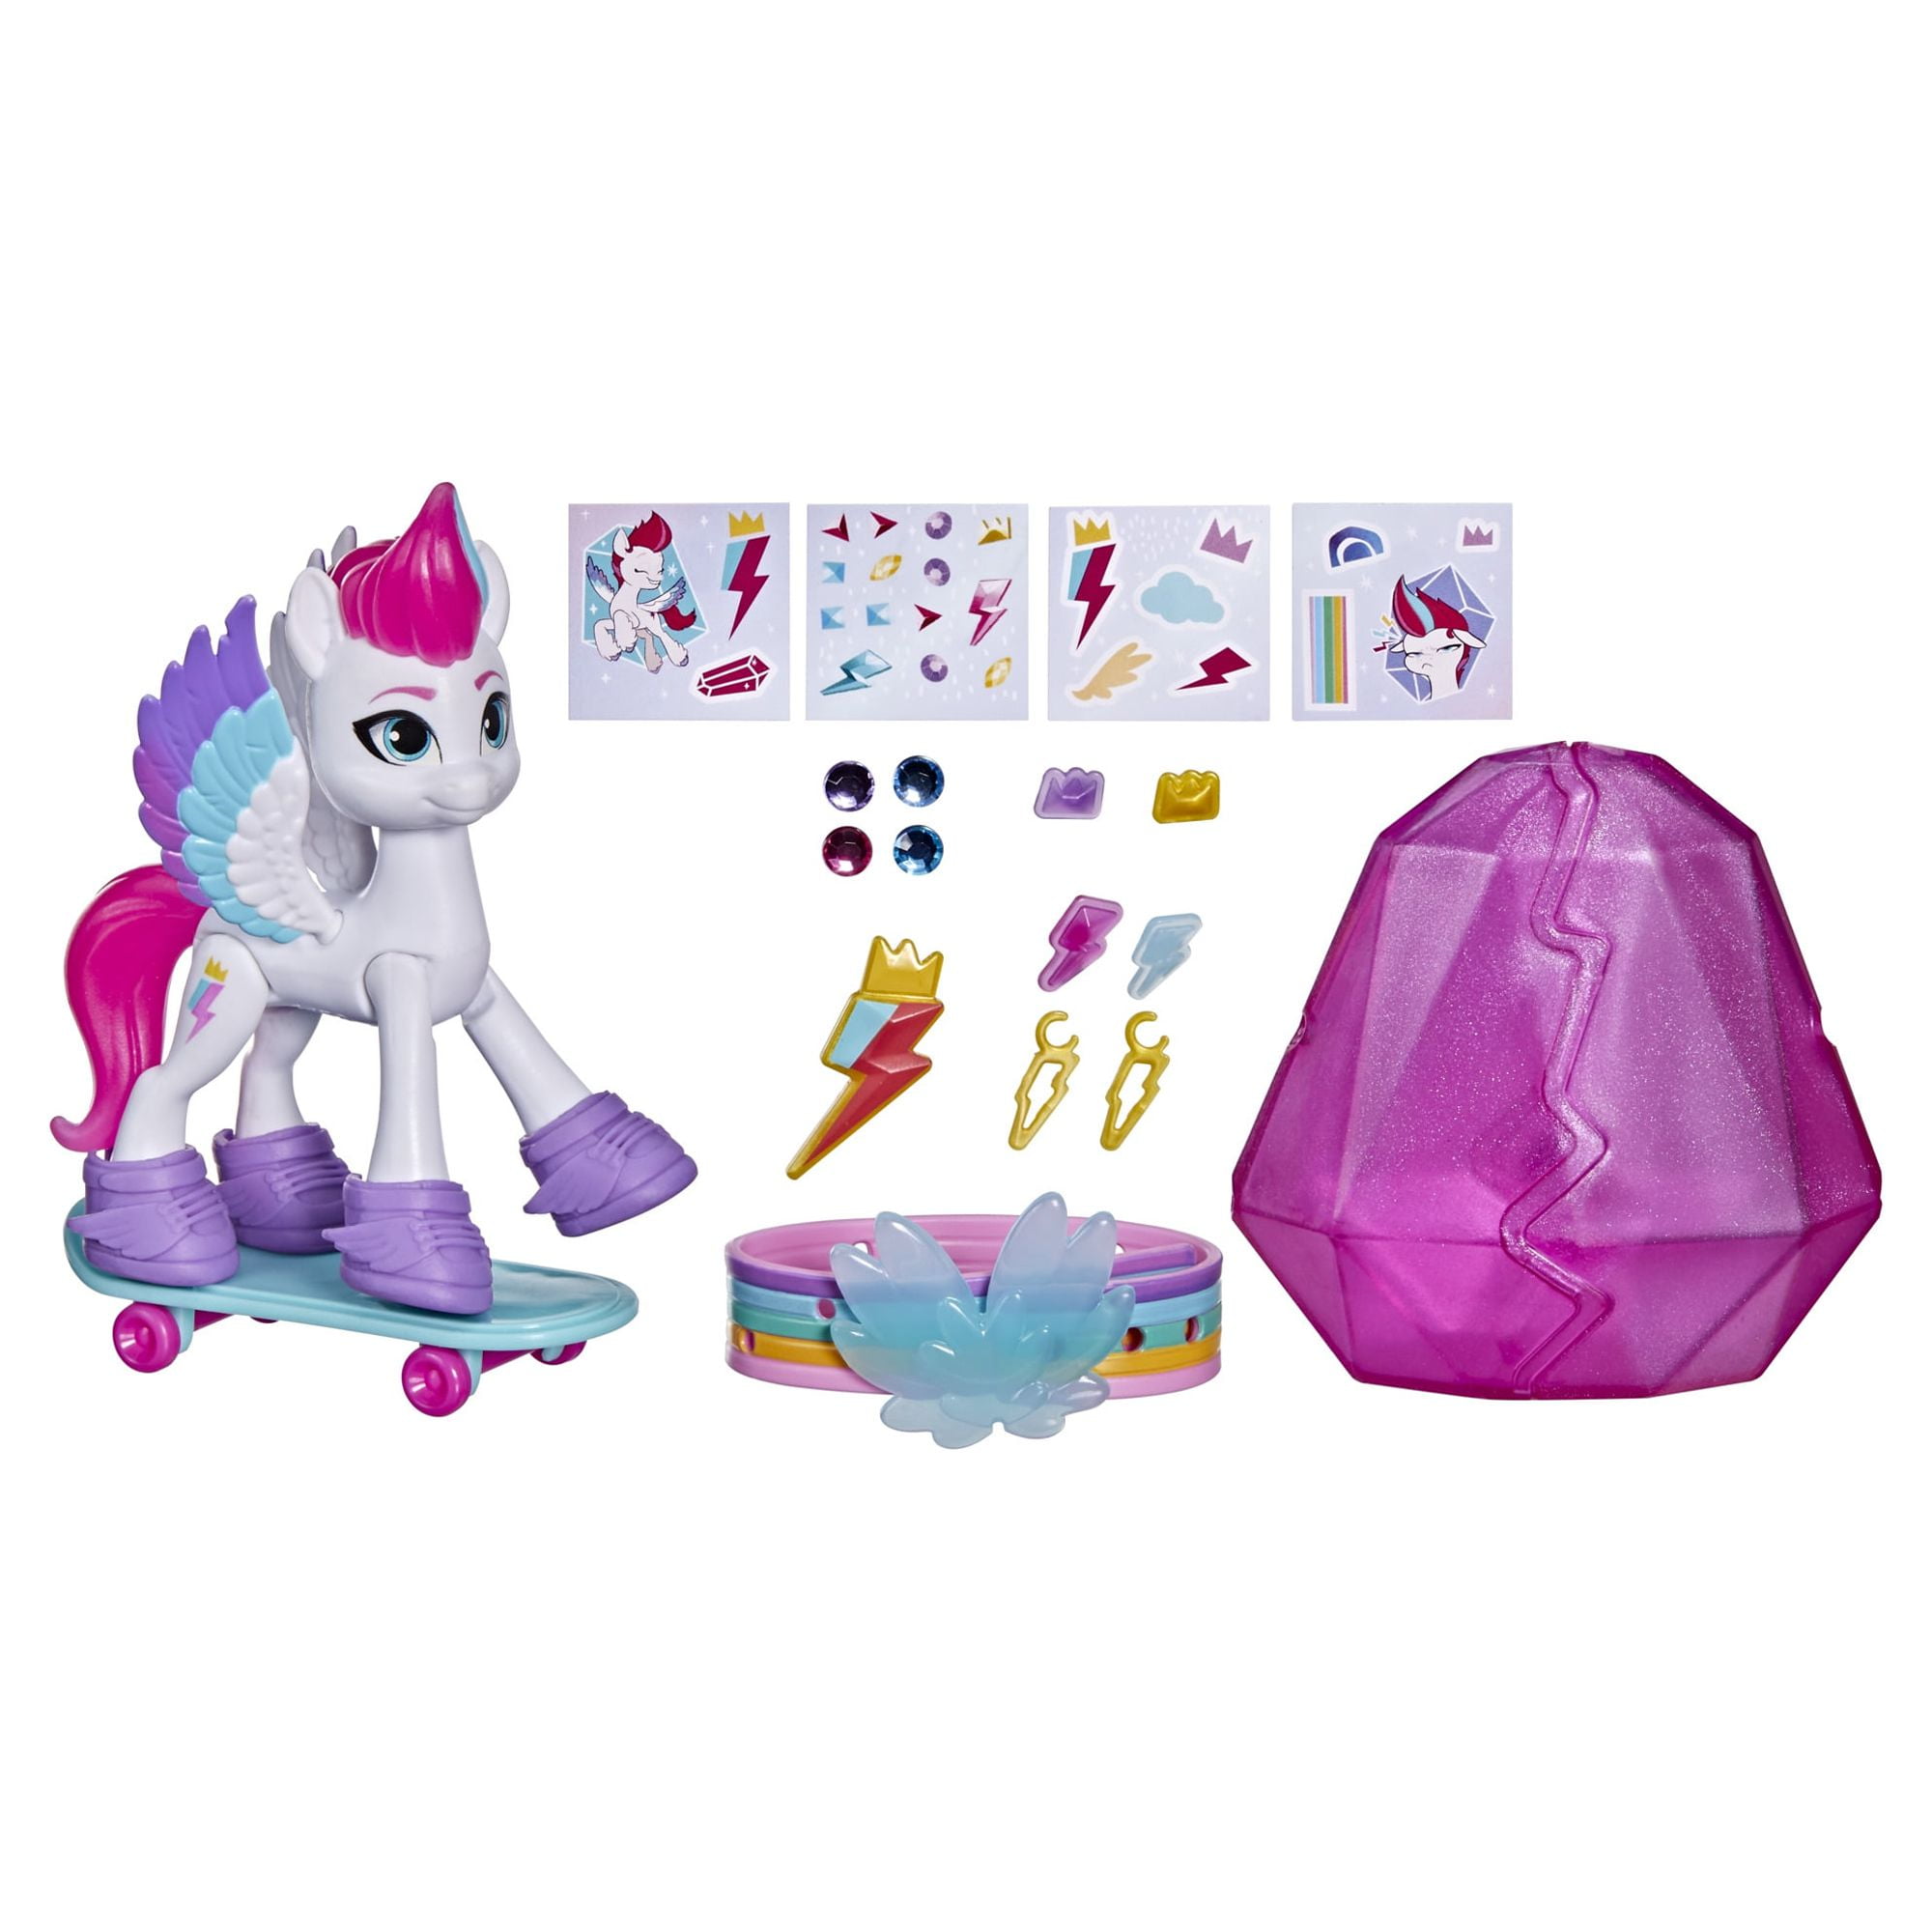 My Little Pony Toys Zipp Storm Style of The Day, 5-Inch Hair